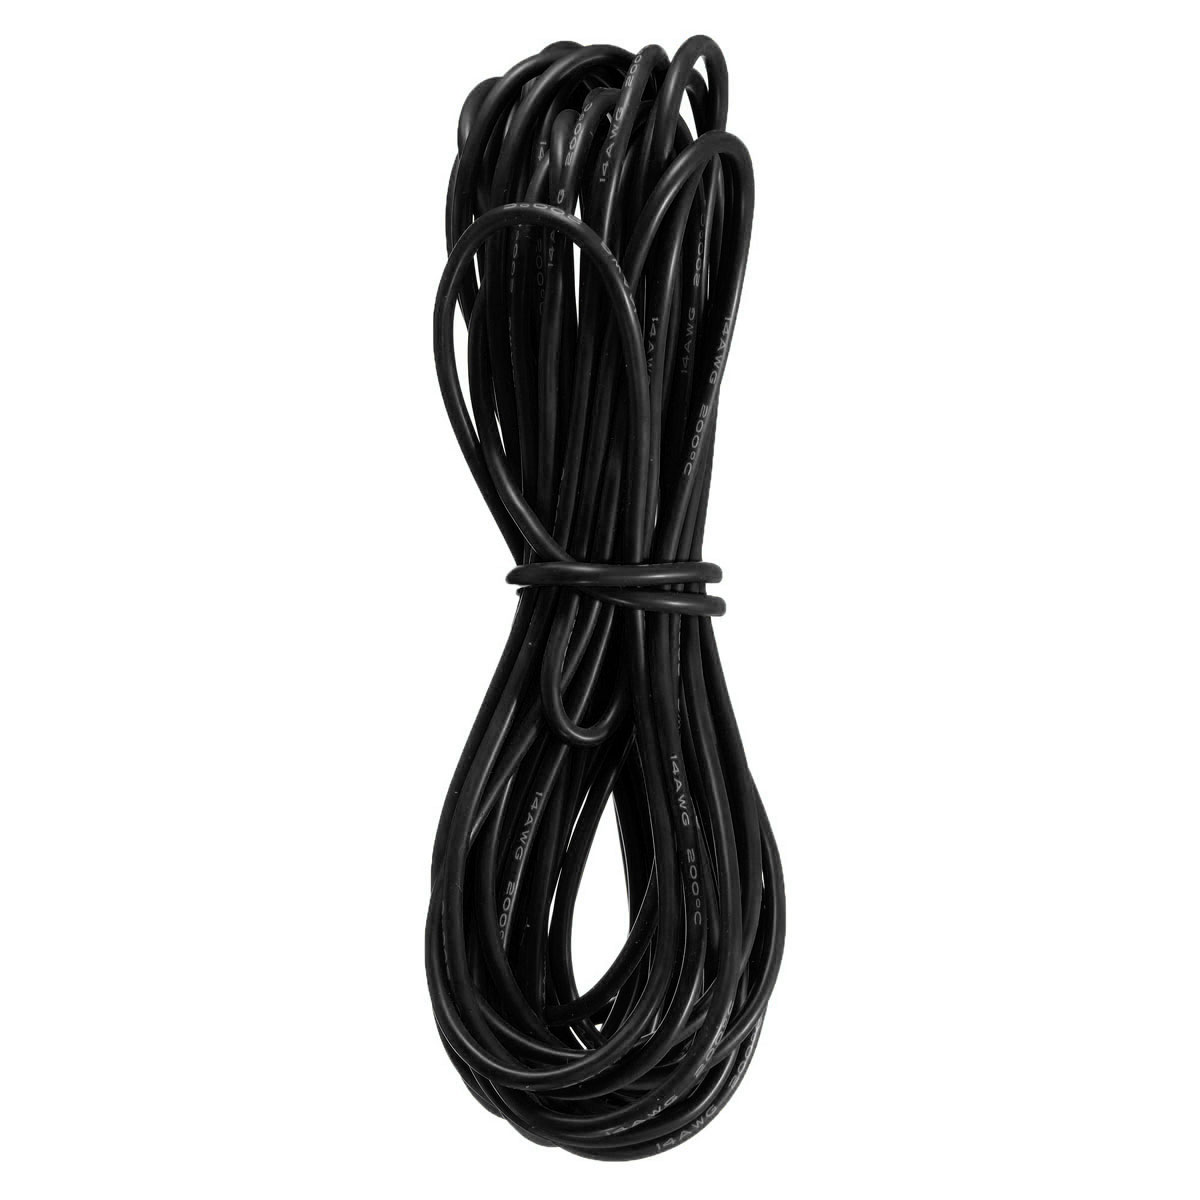 DANIU-10-Meter-Black-Silicone-Wire-Cable-10121416182022AWG-Flexible-Cable-1170303-8